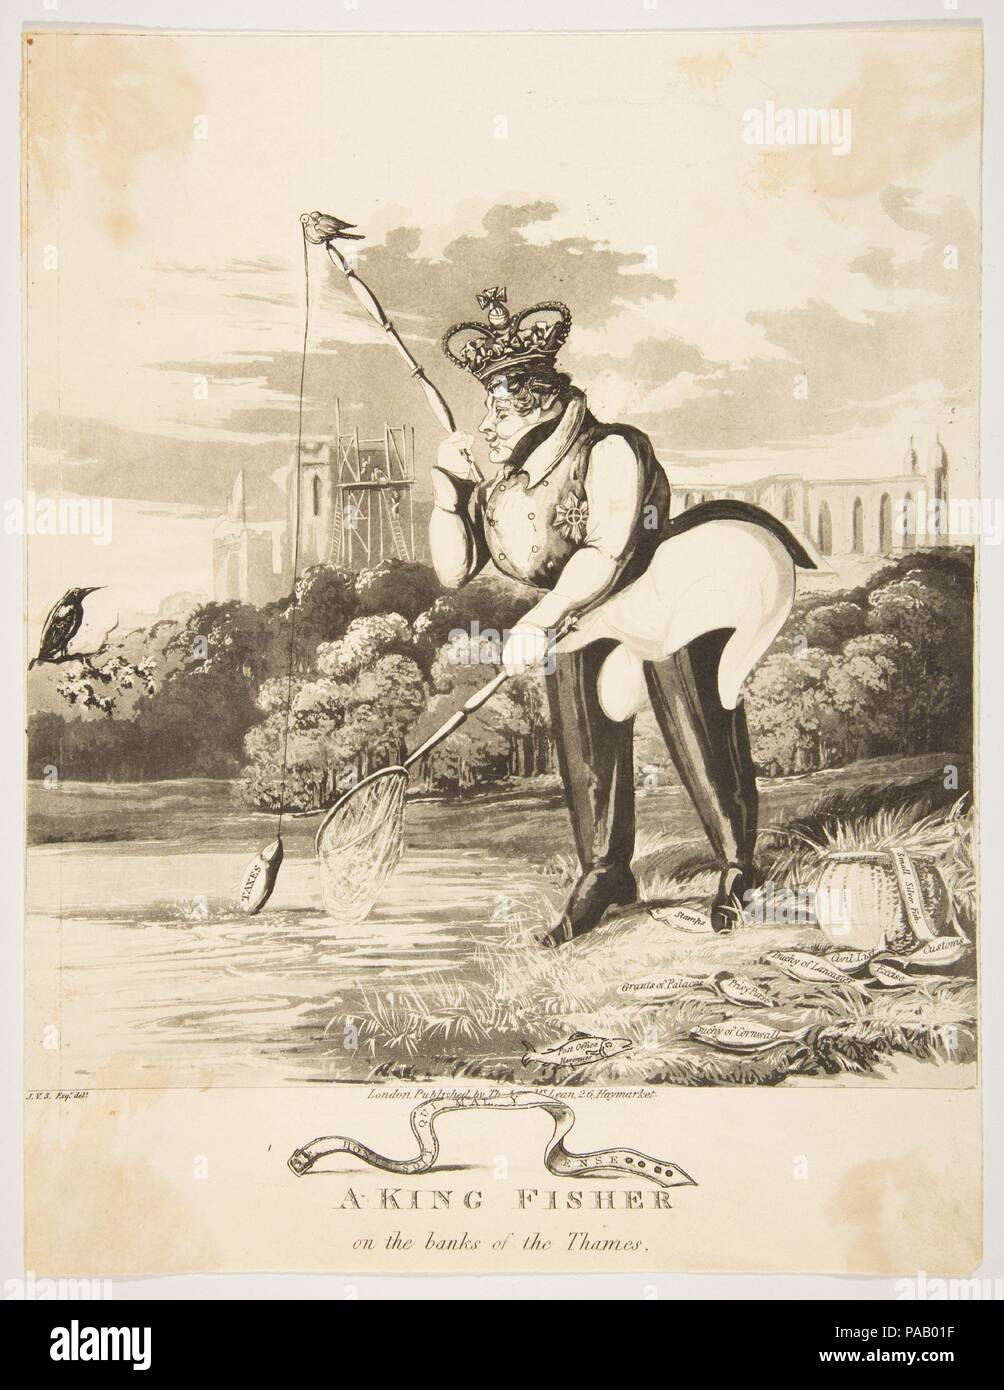 A King Fisher on the Banks of the Thames. Artist: Monogrammist JVS (British, active 1827). Dimensions: sheet: 11 3/16 x 8 9/16 in. (28.4 x 21.8 cm). Publisher: Thomas McLean (British, active London 1788-1885). Date: 1827. Museum: Metropolitan Museum of Art, New York, USA. Stock Photo